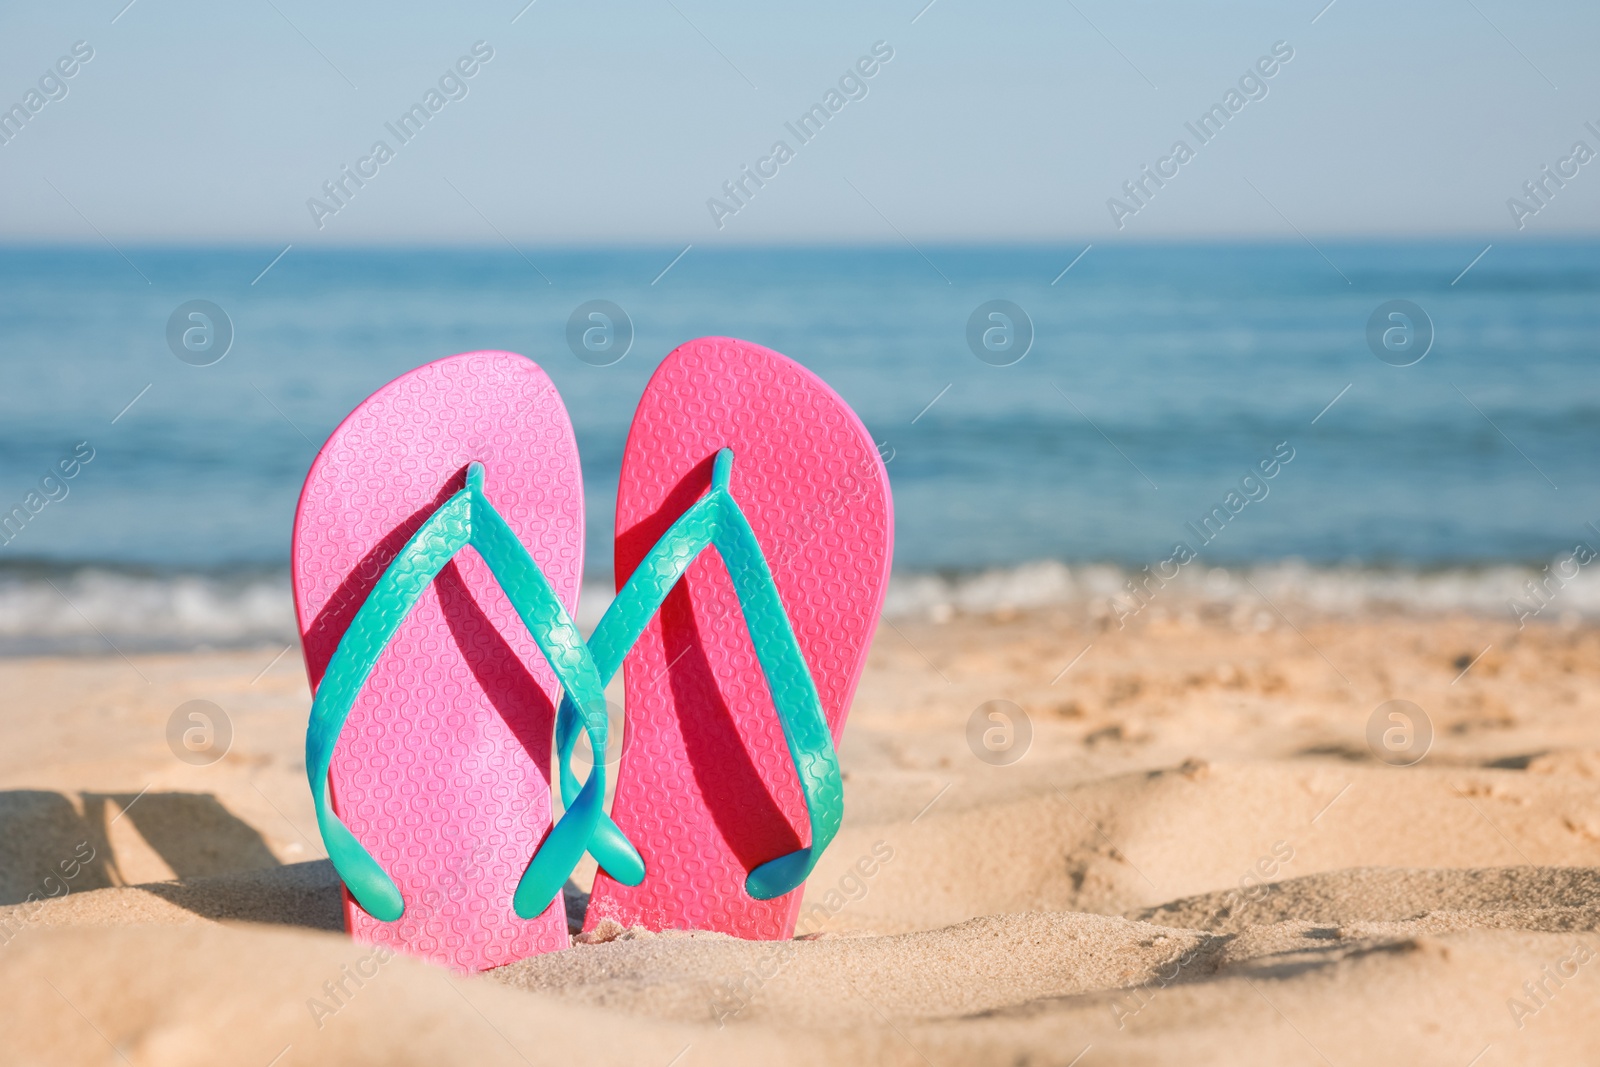 Photo of Stylish flip flops in sand on beach. Space for text